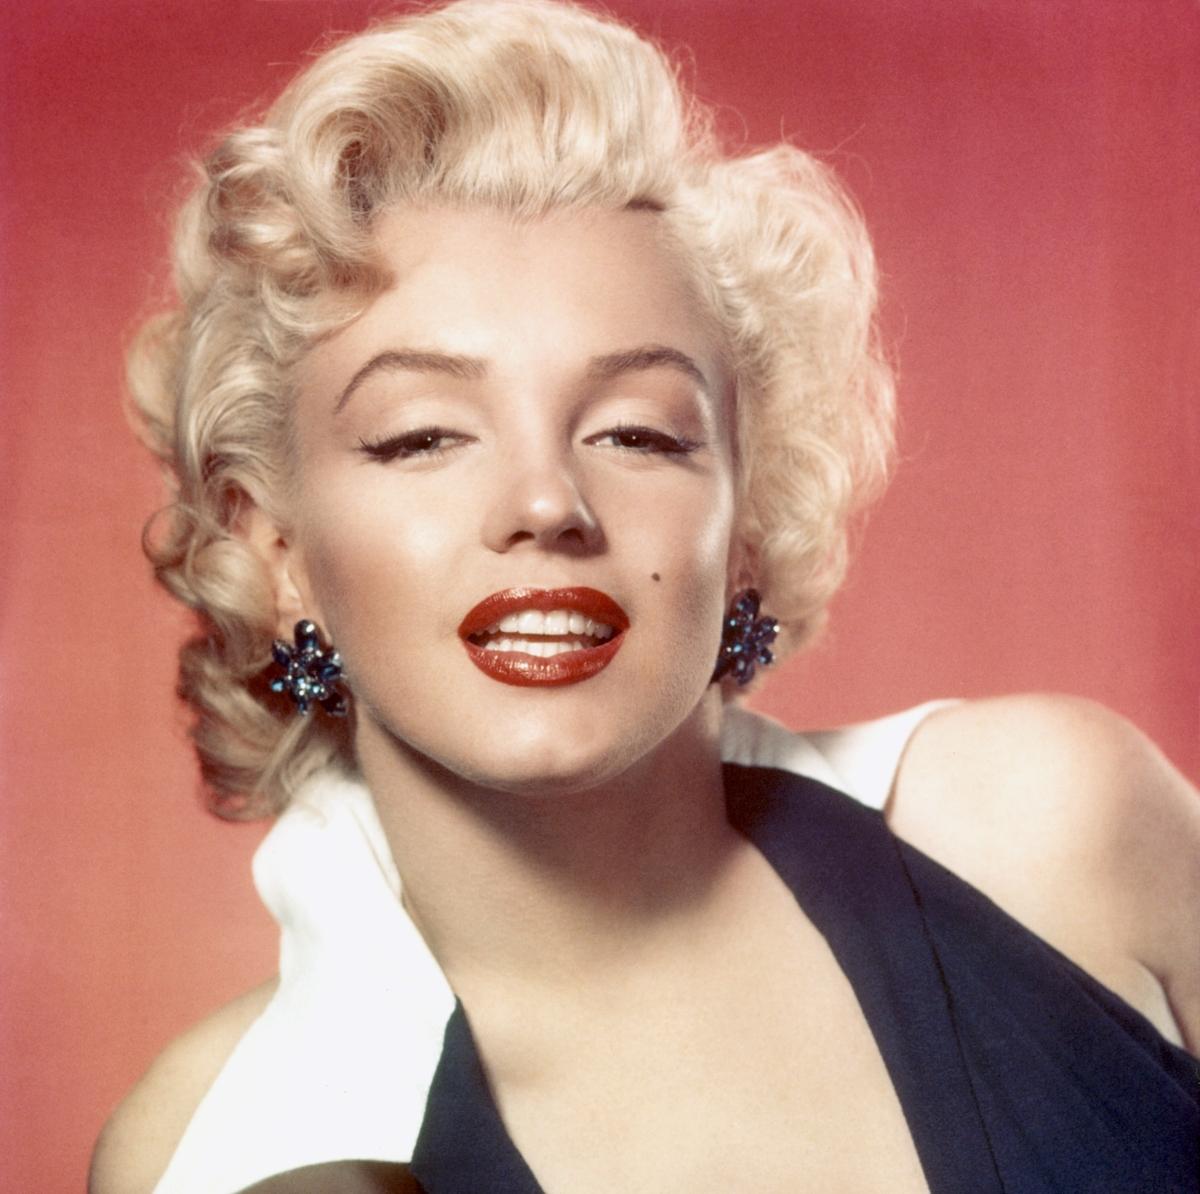 Did Marilyn Monroe Have Plastic Surgery? Unanswered in 'Blonde